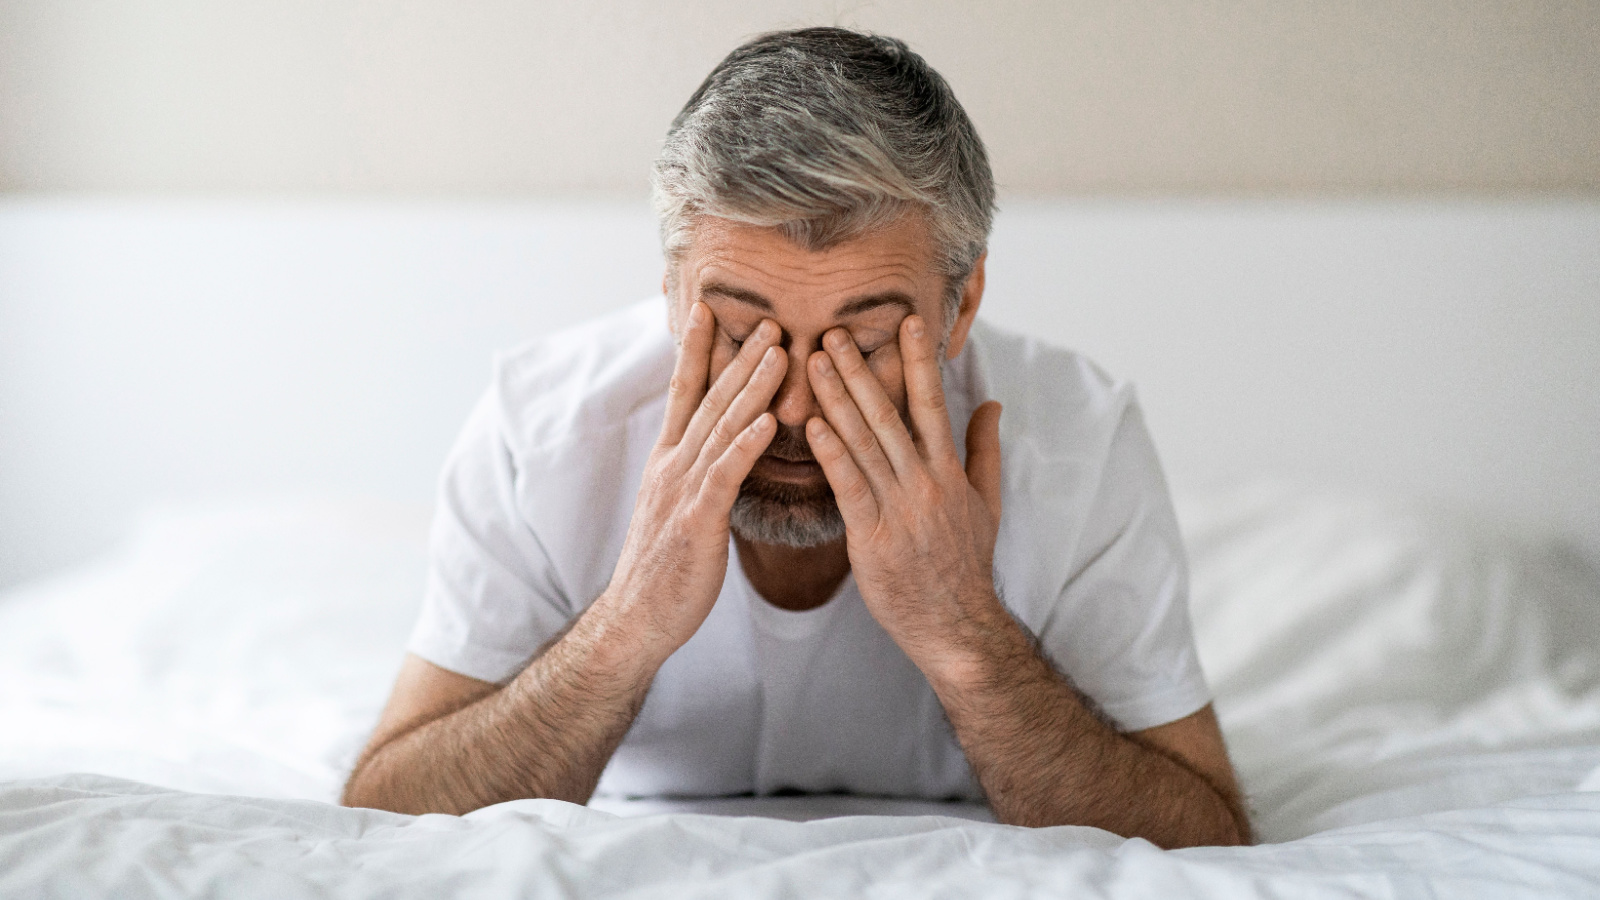 male sleeping disorder tired exhausted in bed